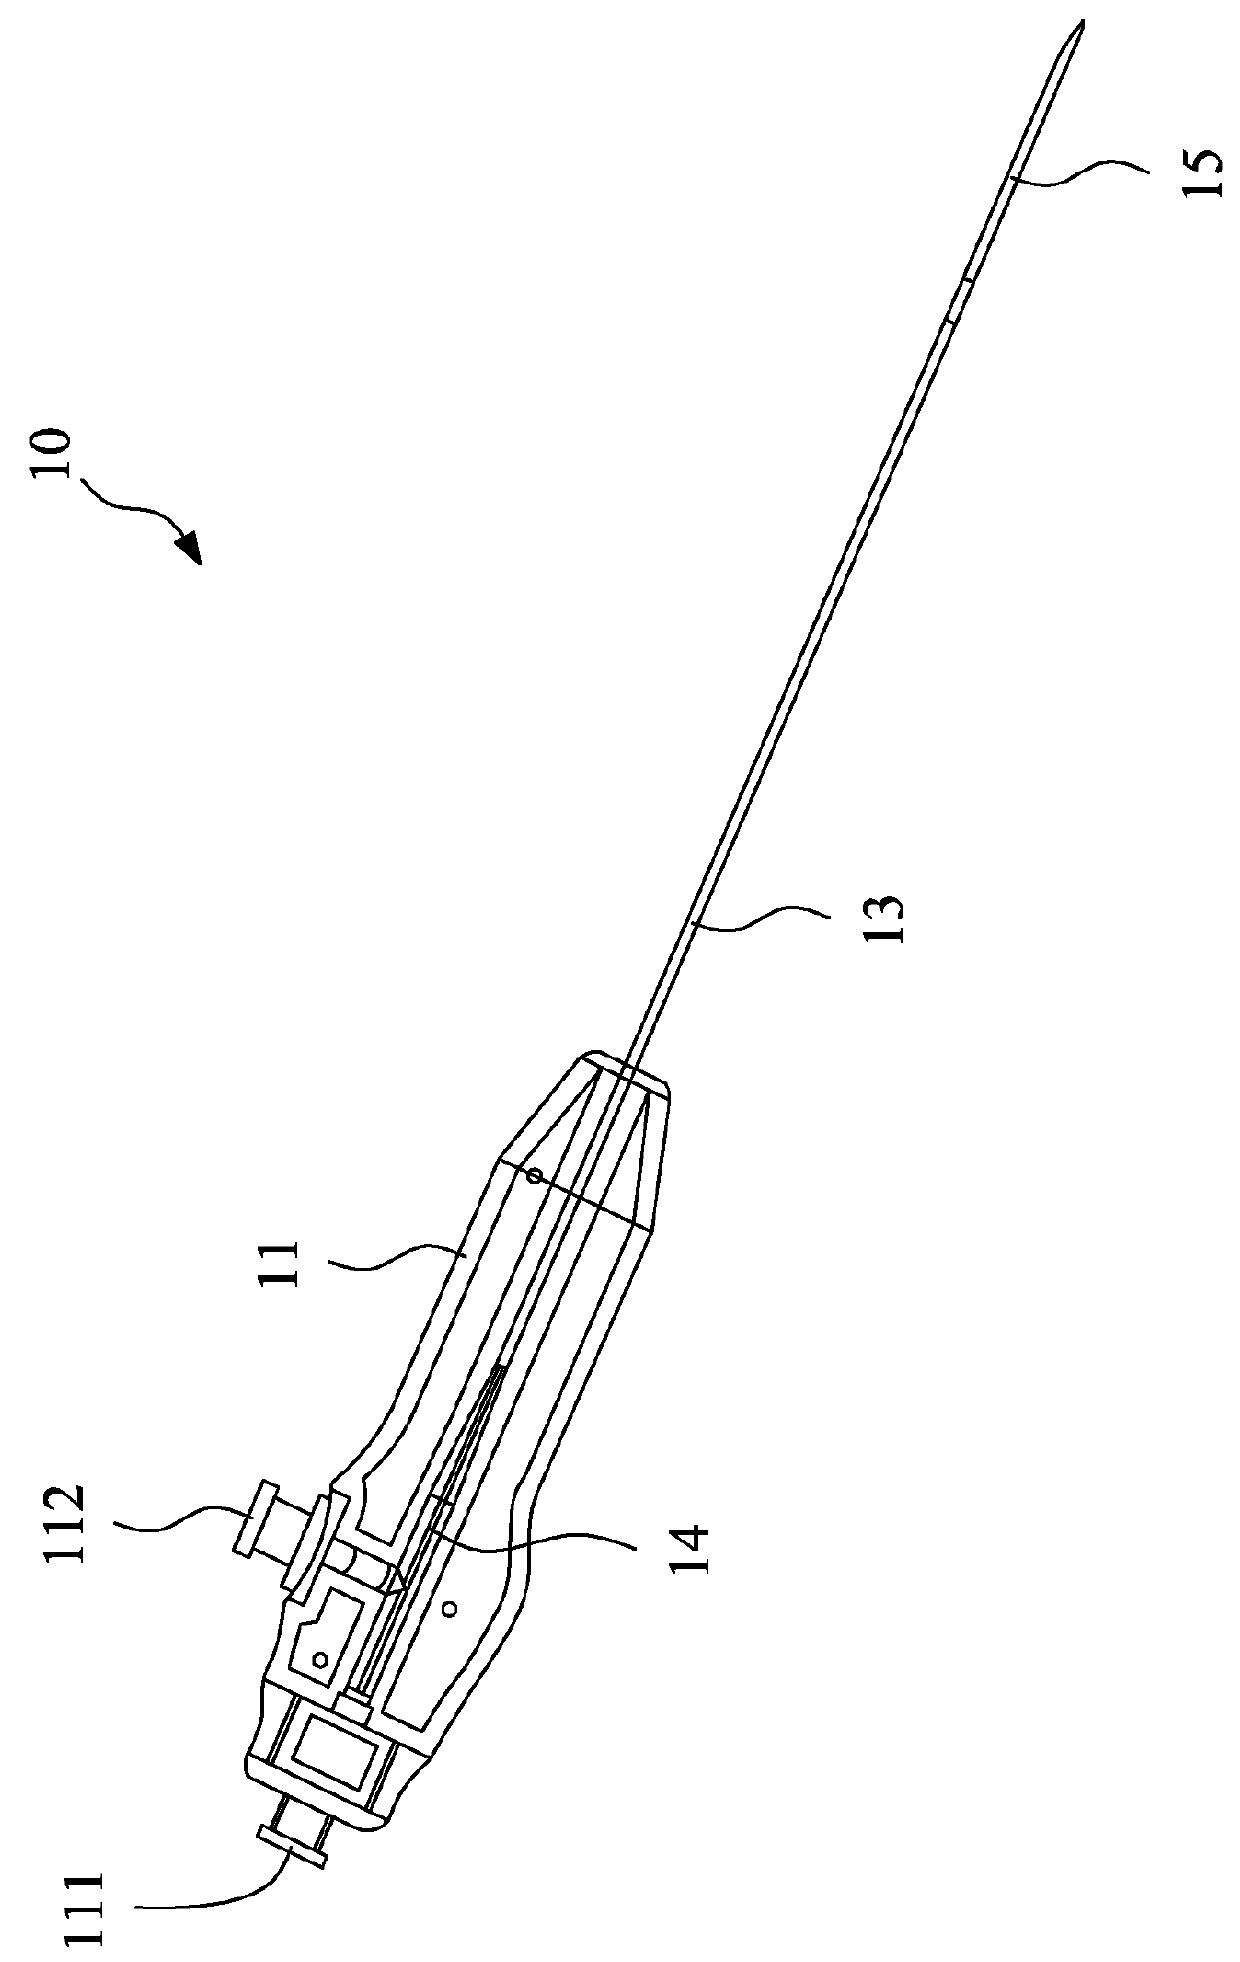 Thermotherapy needling instrument with tissue injection